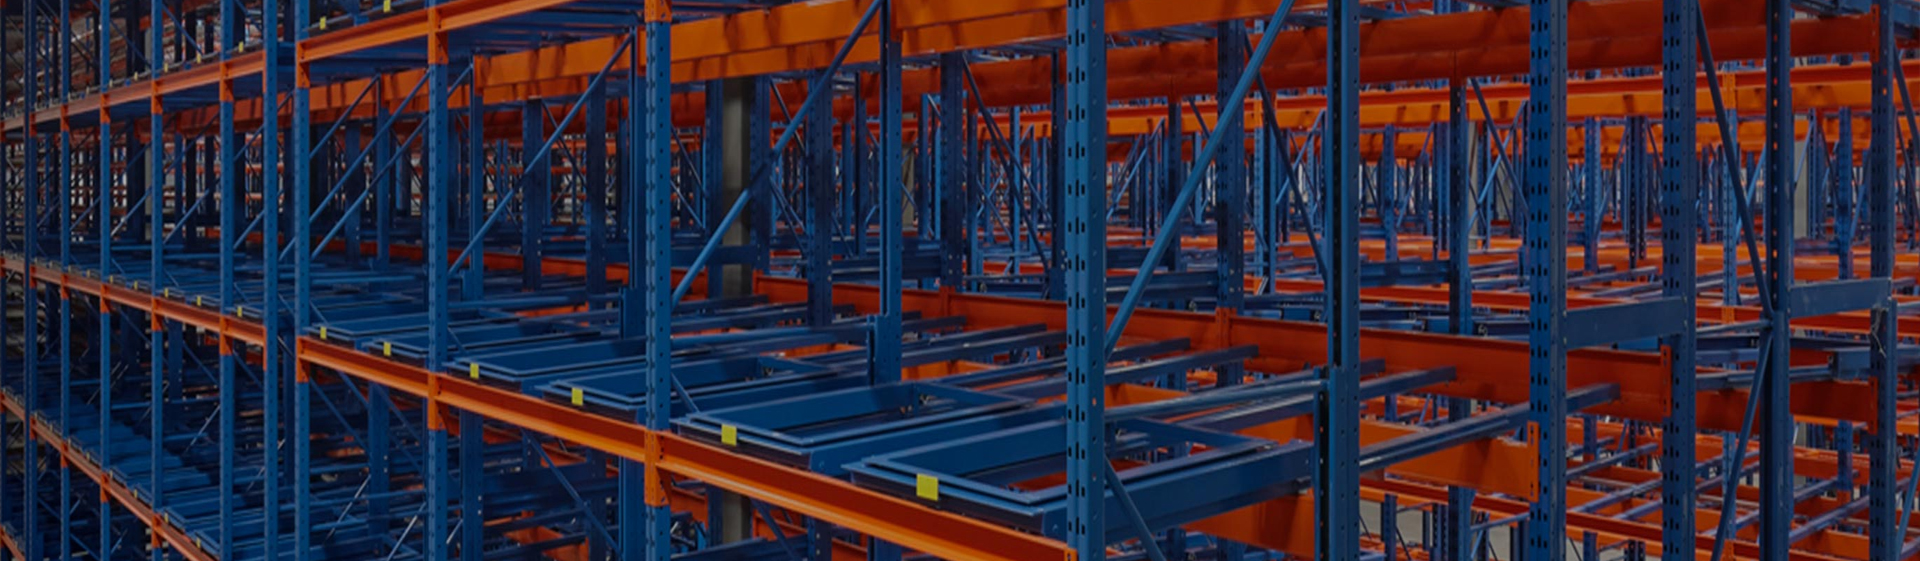 Heavy Duty Pallet Racking Systems